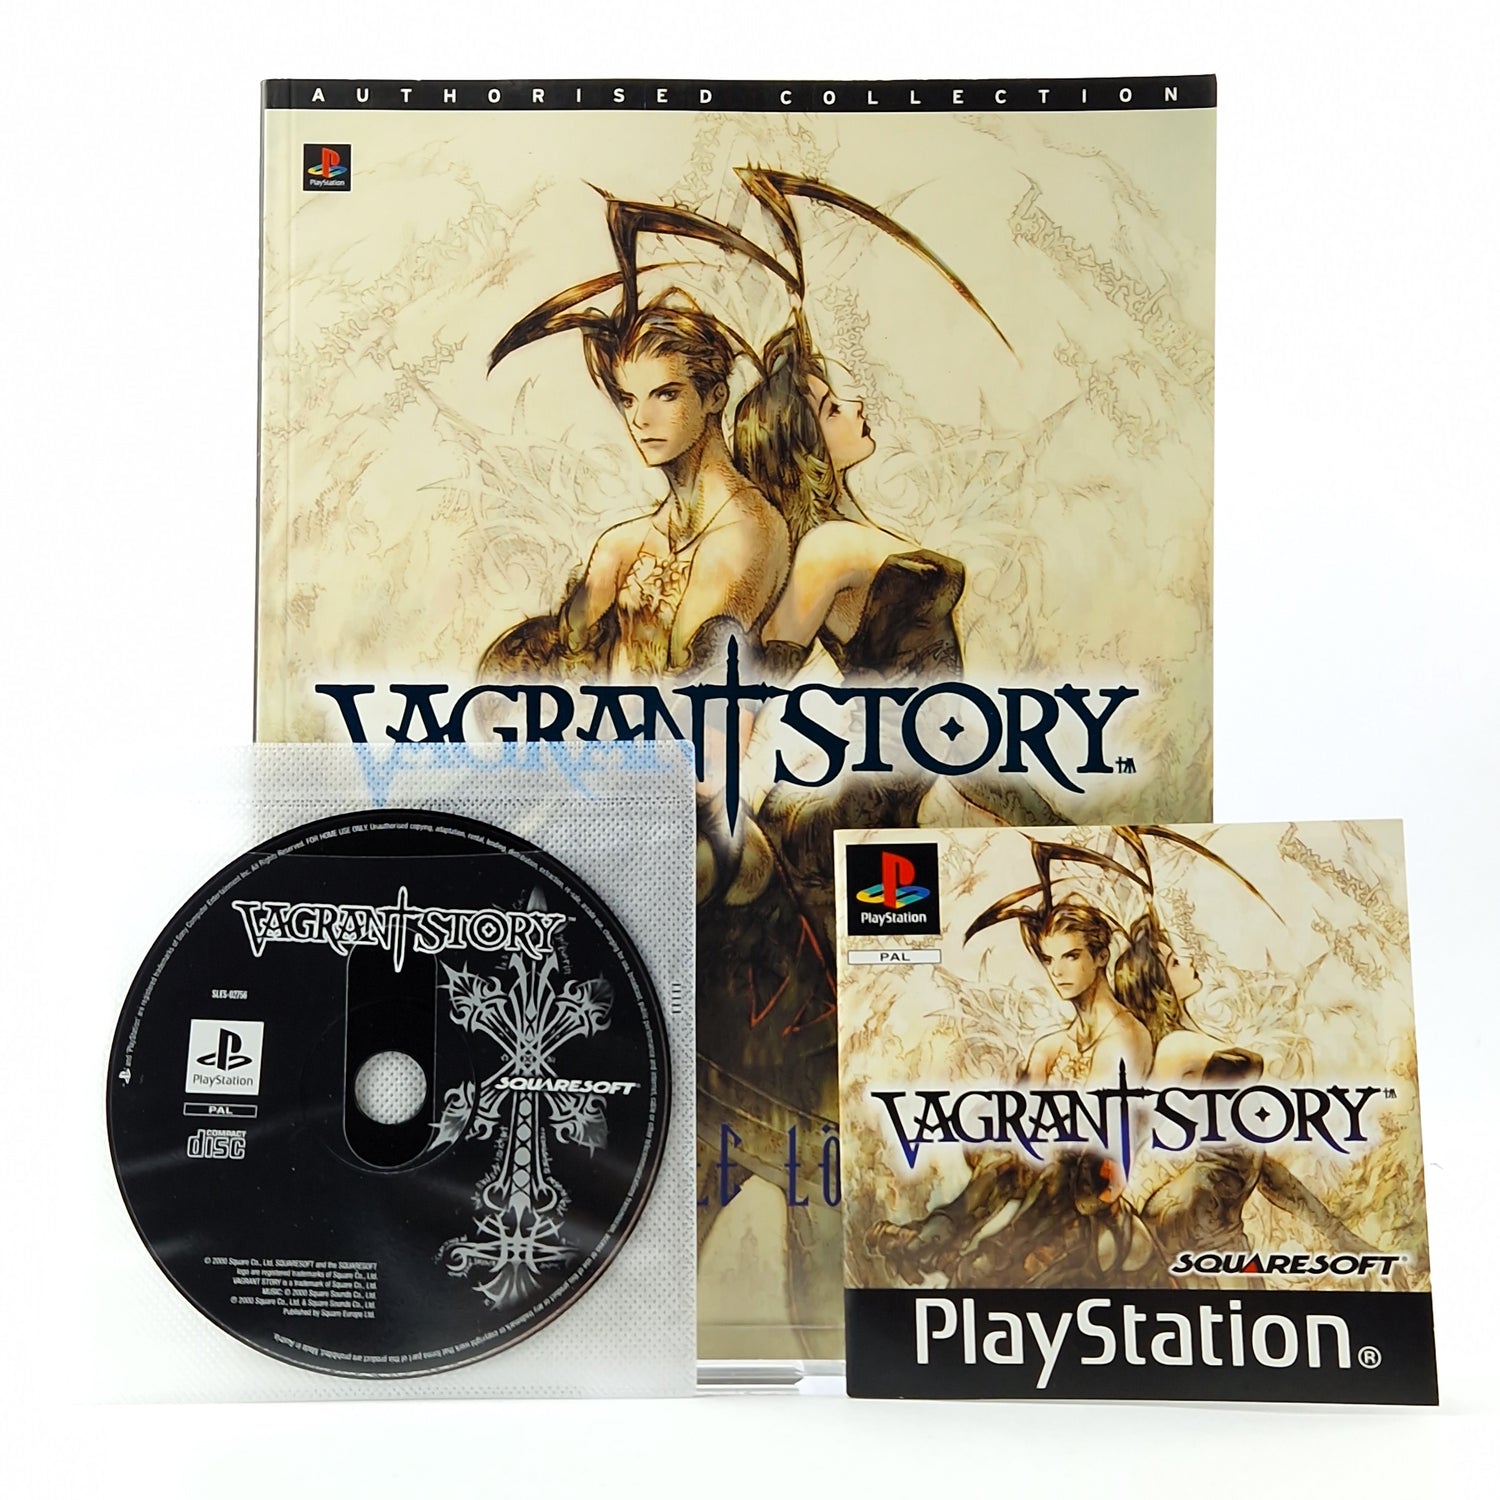 Playstation 1 game: Vagrant Story - CD + instructions with solution book guide PS1